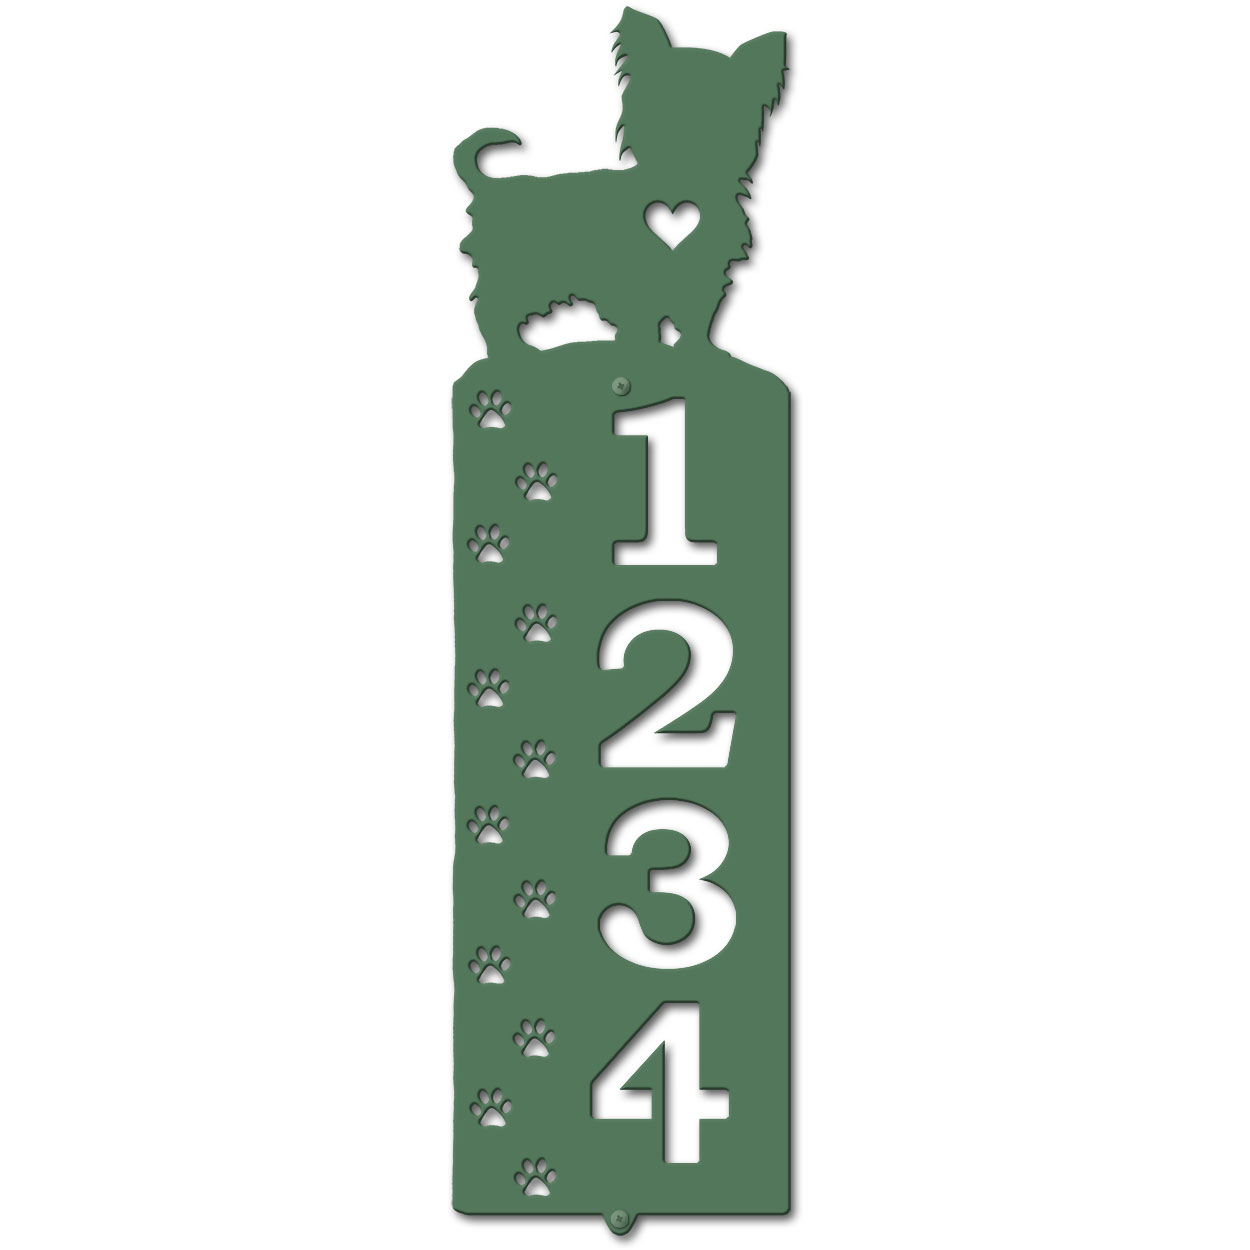 636324 - Yorkie Cut Outs Four Digit Address Number Plaque